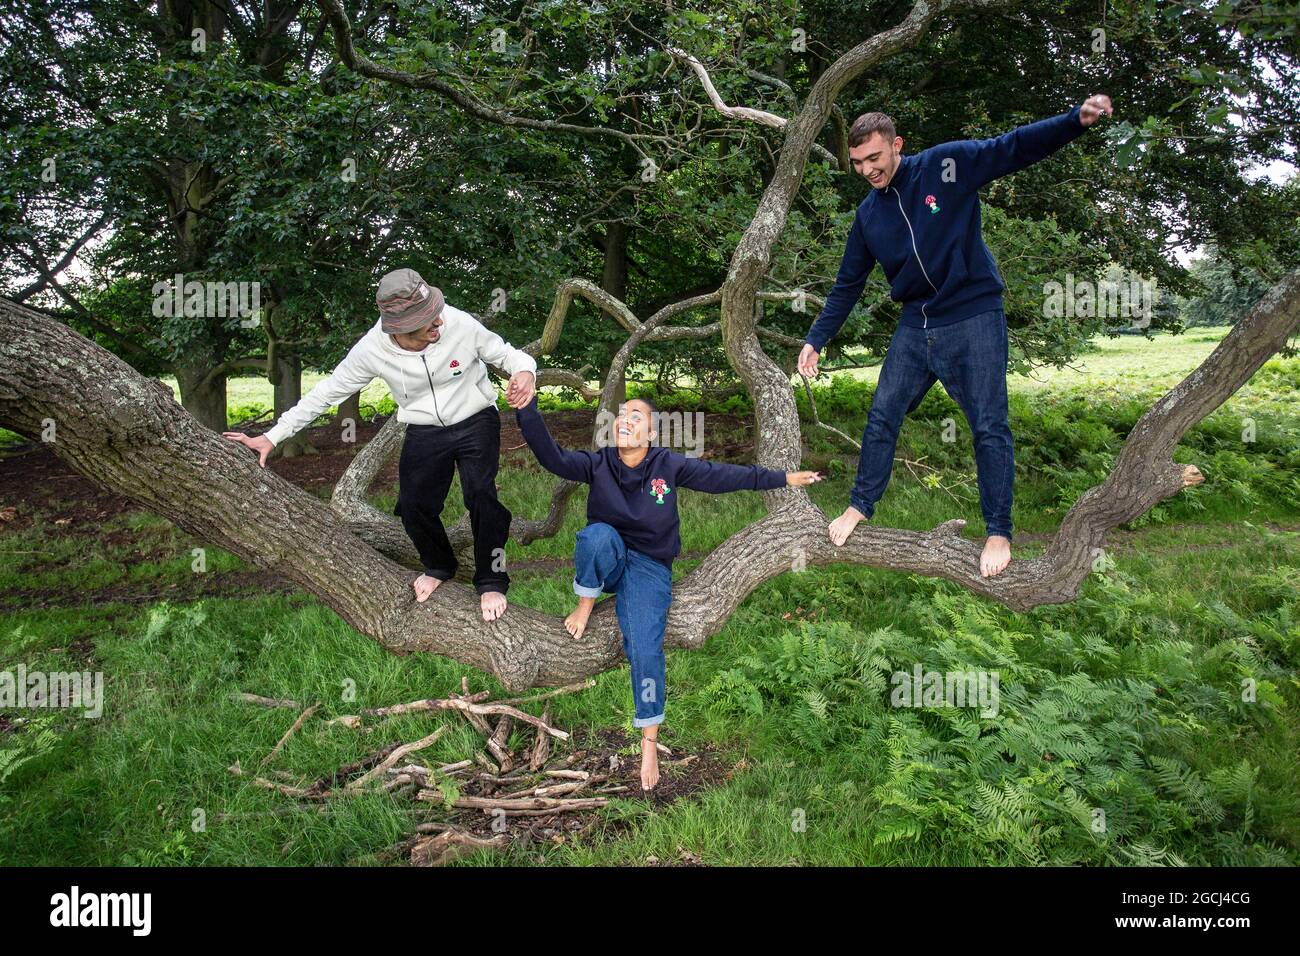 Group of young people in the park climbing a tree Stock Photo